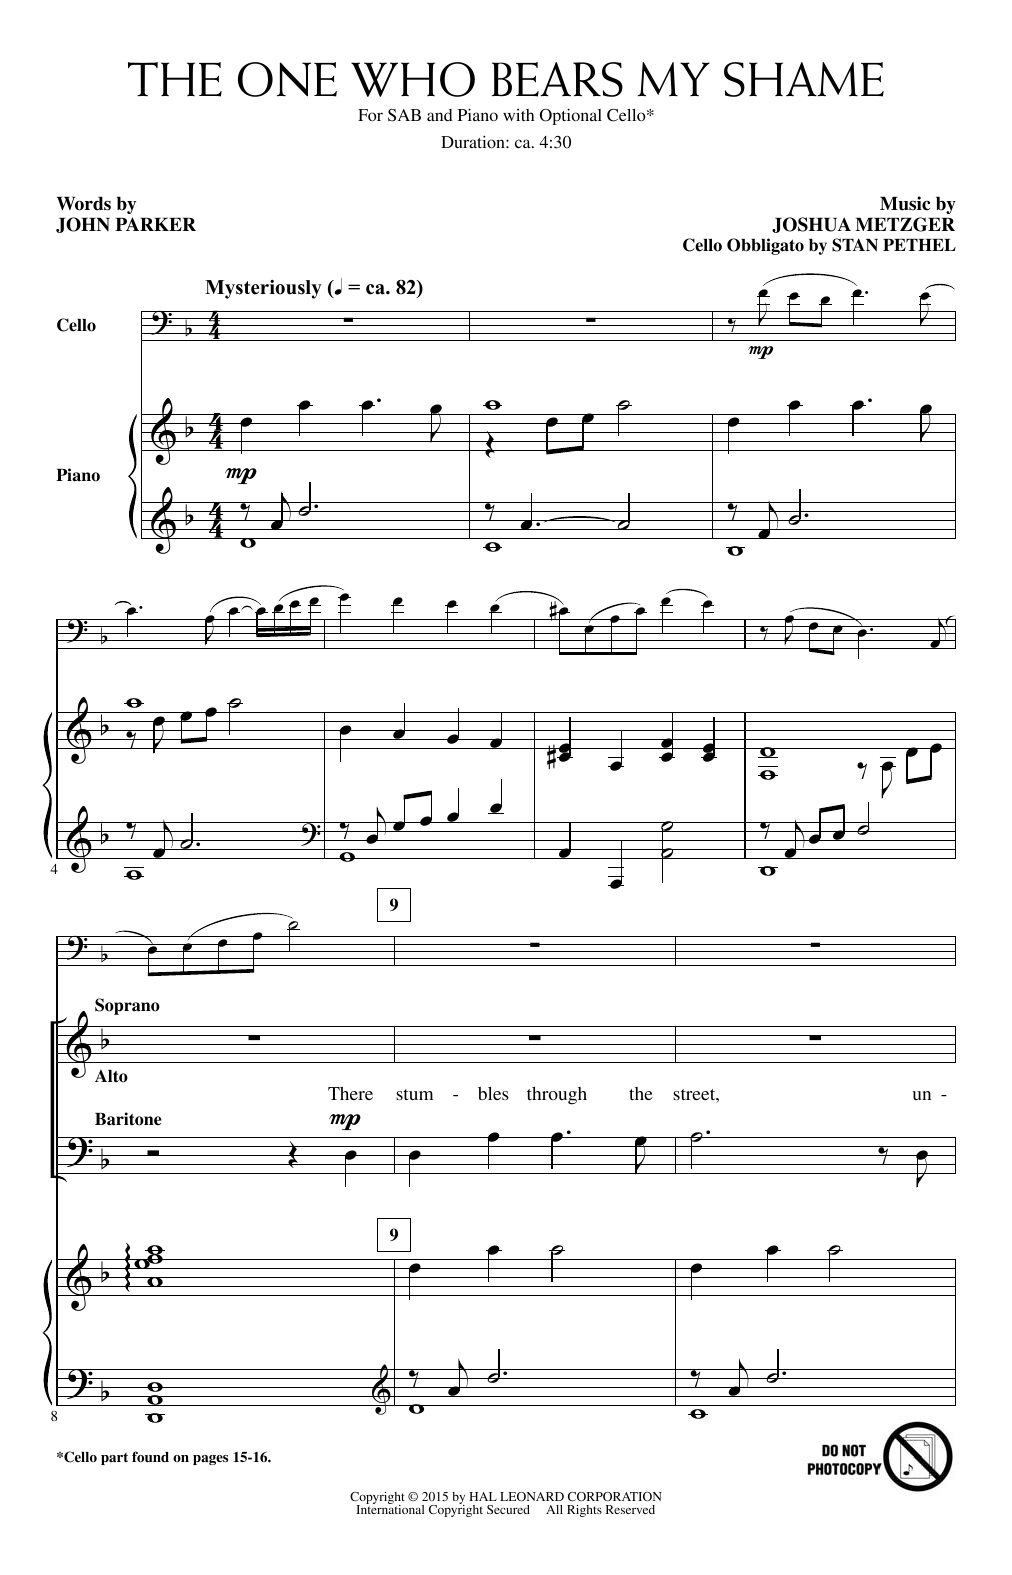 Download Joshua Metzger The One Who Bears My Shame Sheet Music